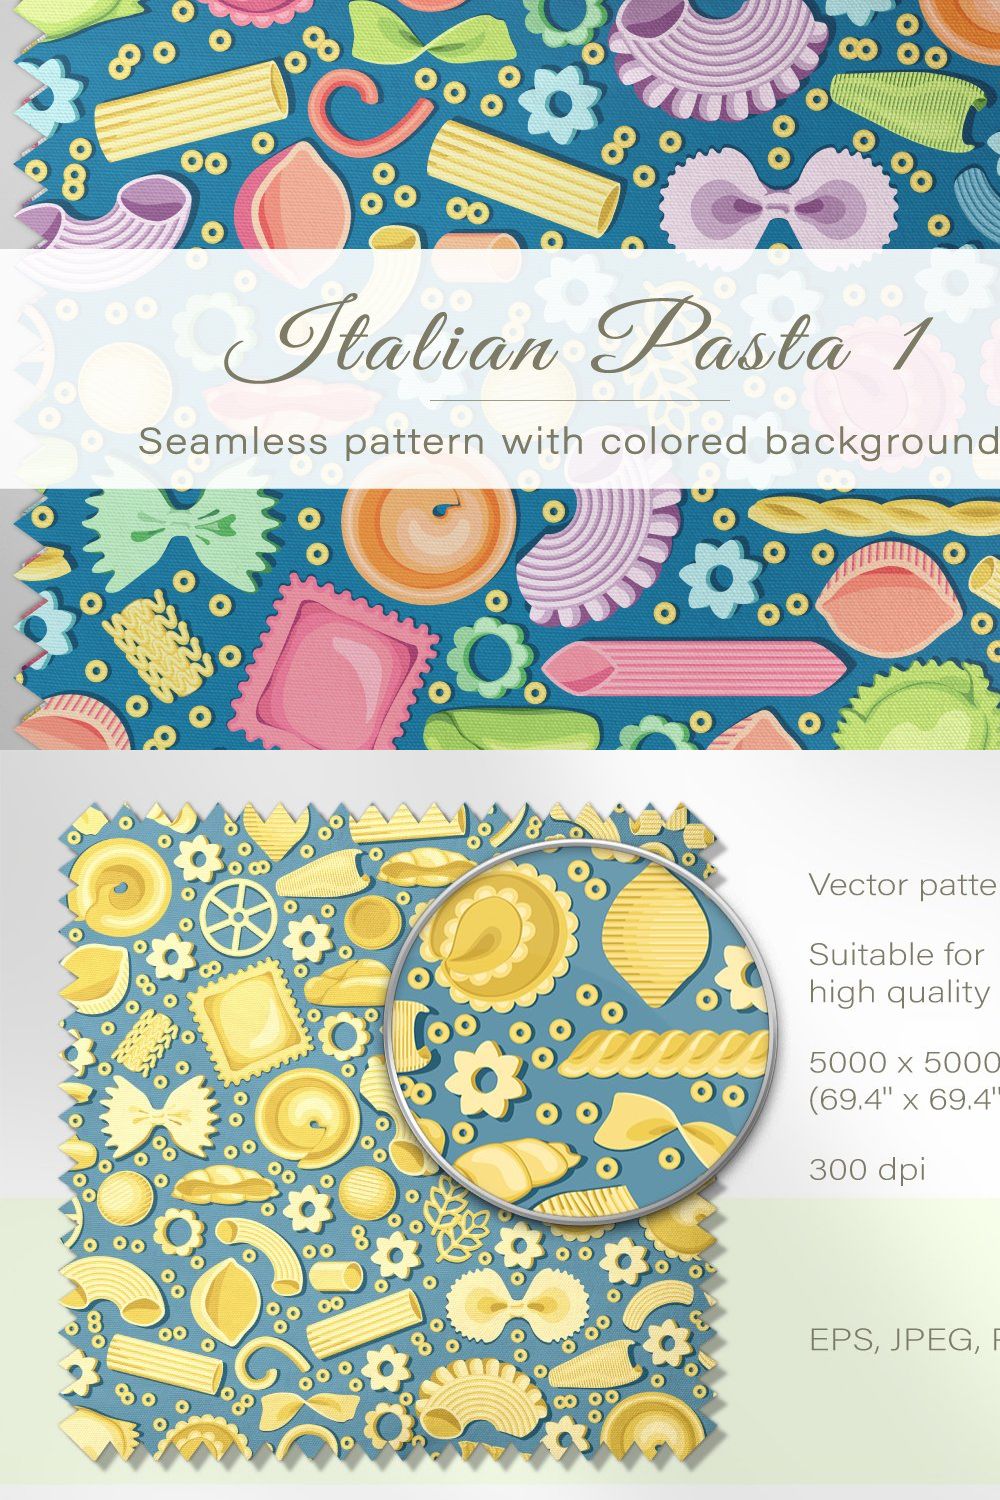 Seamless pattern of Italian pasta 1 pinterest preview image.